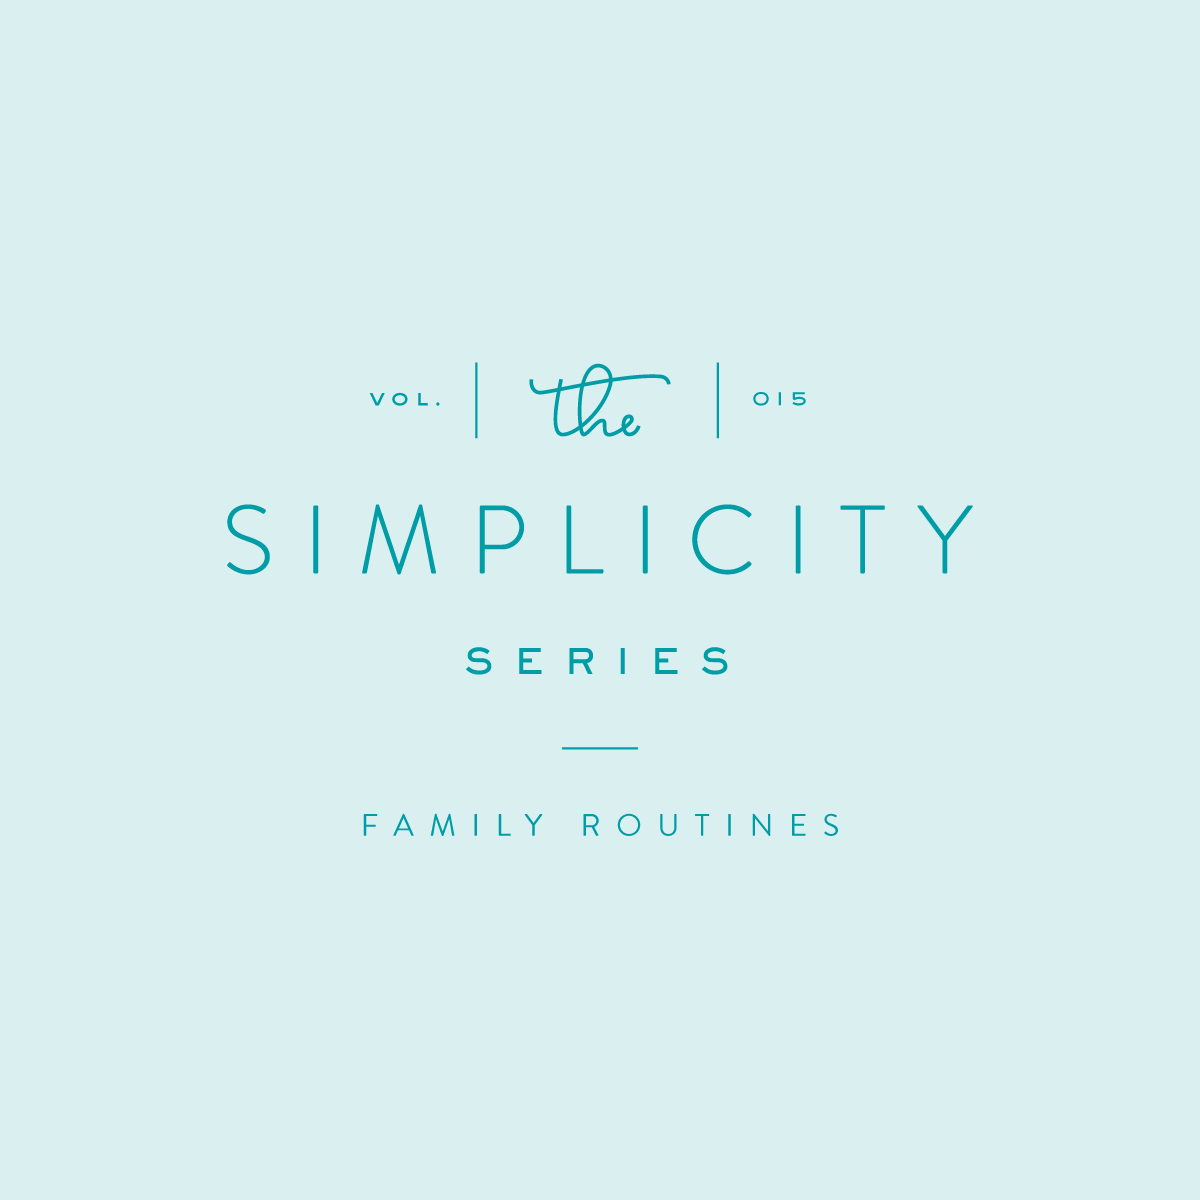 Simplified Schedule: Family Routines